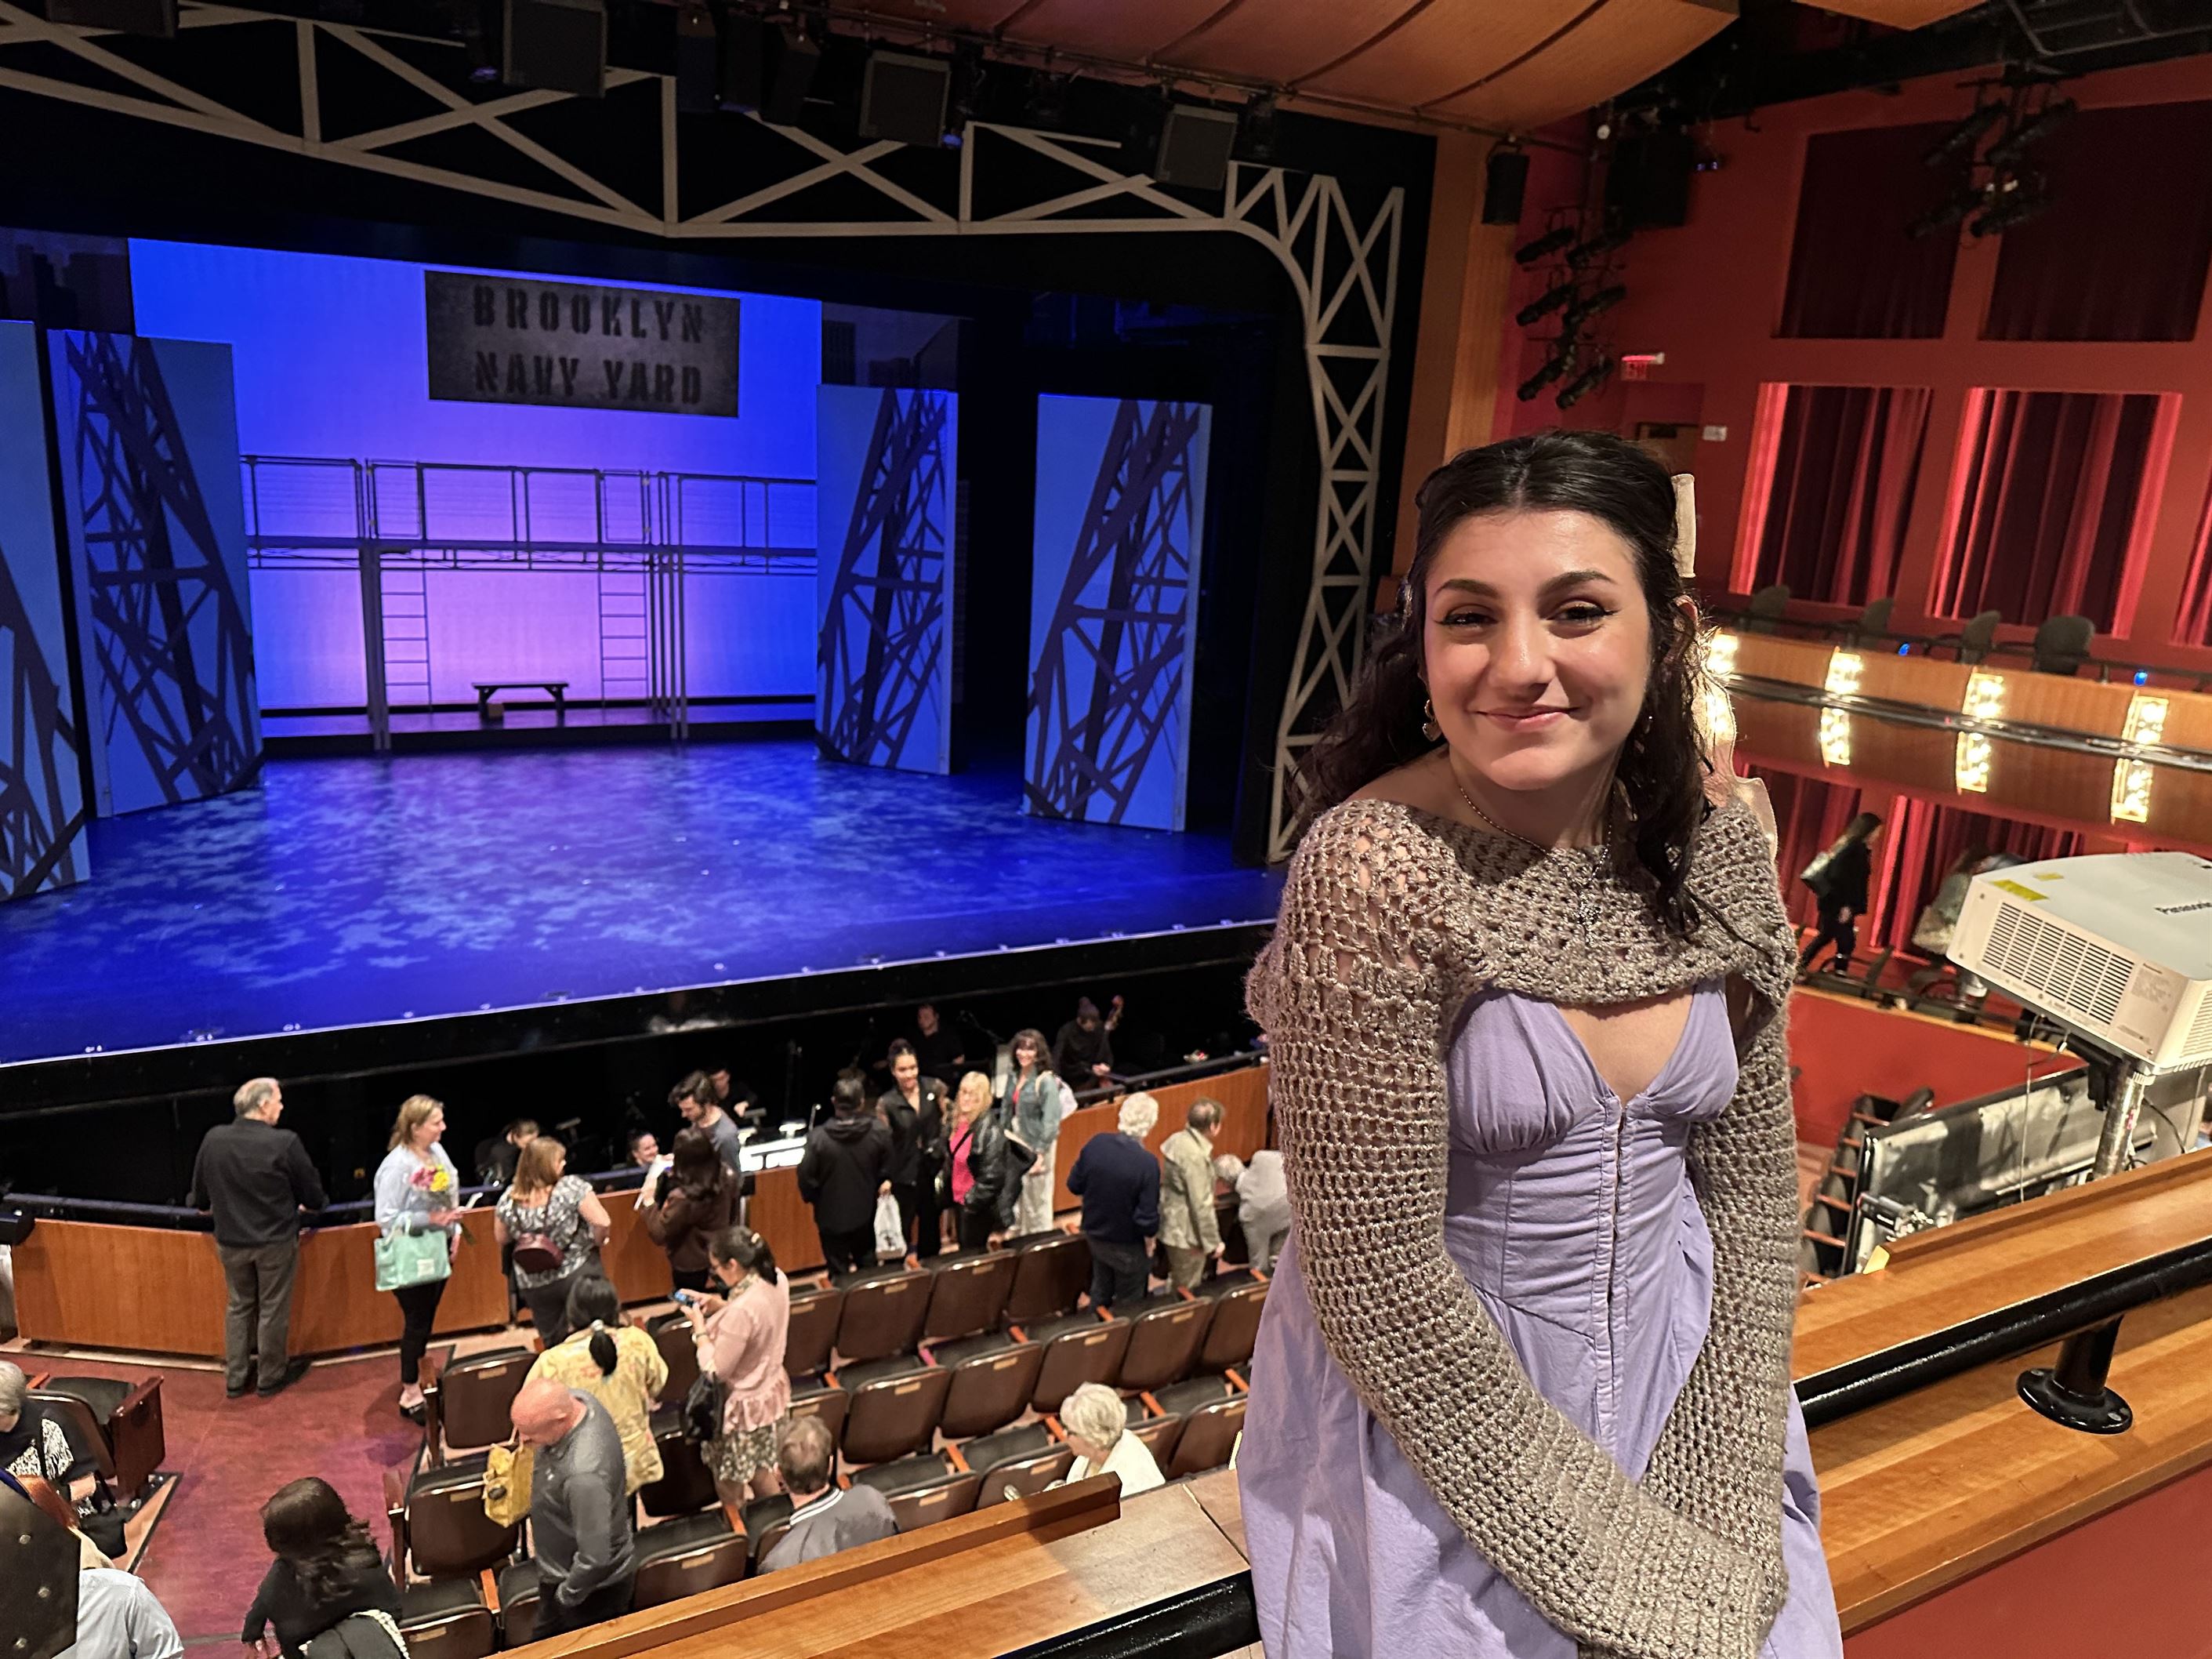 Senior Musical Theatre Major, Maggie Likcani, who had played the main Player in "Pippin", was the assistant choreographer for "On The Town".